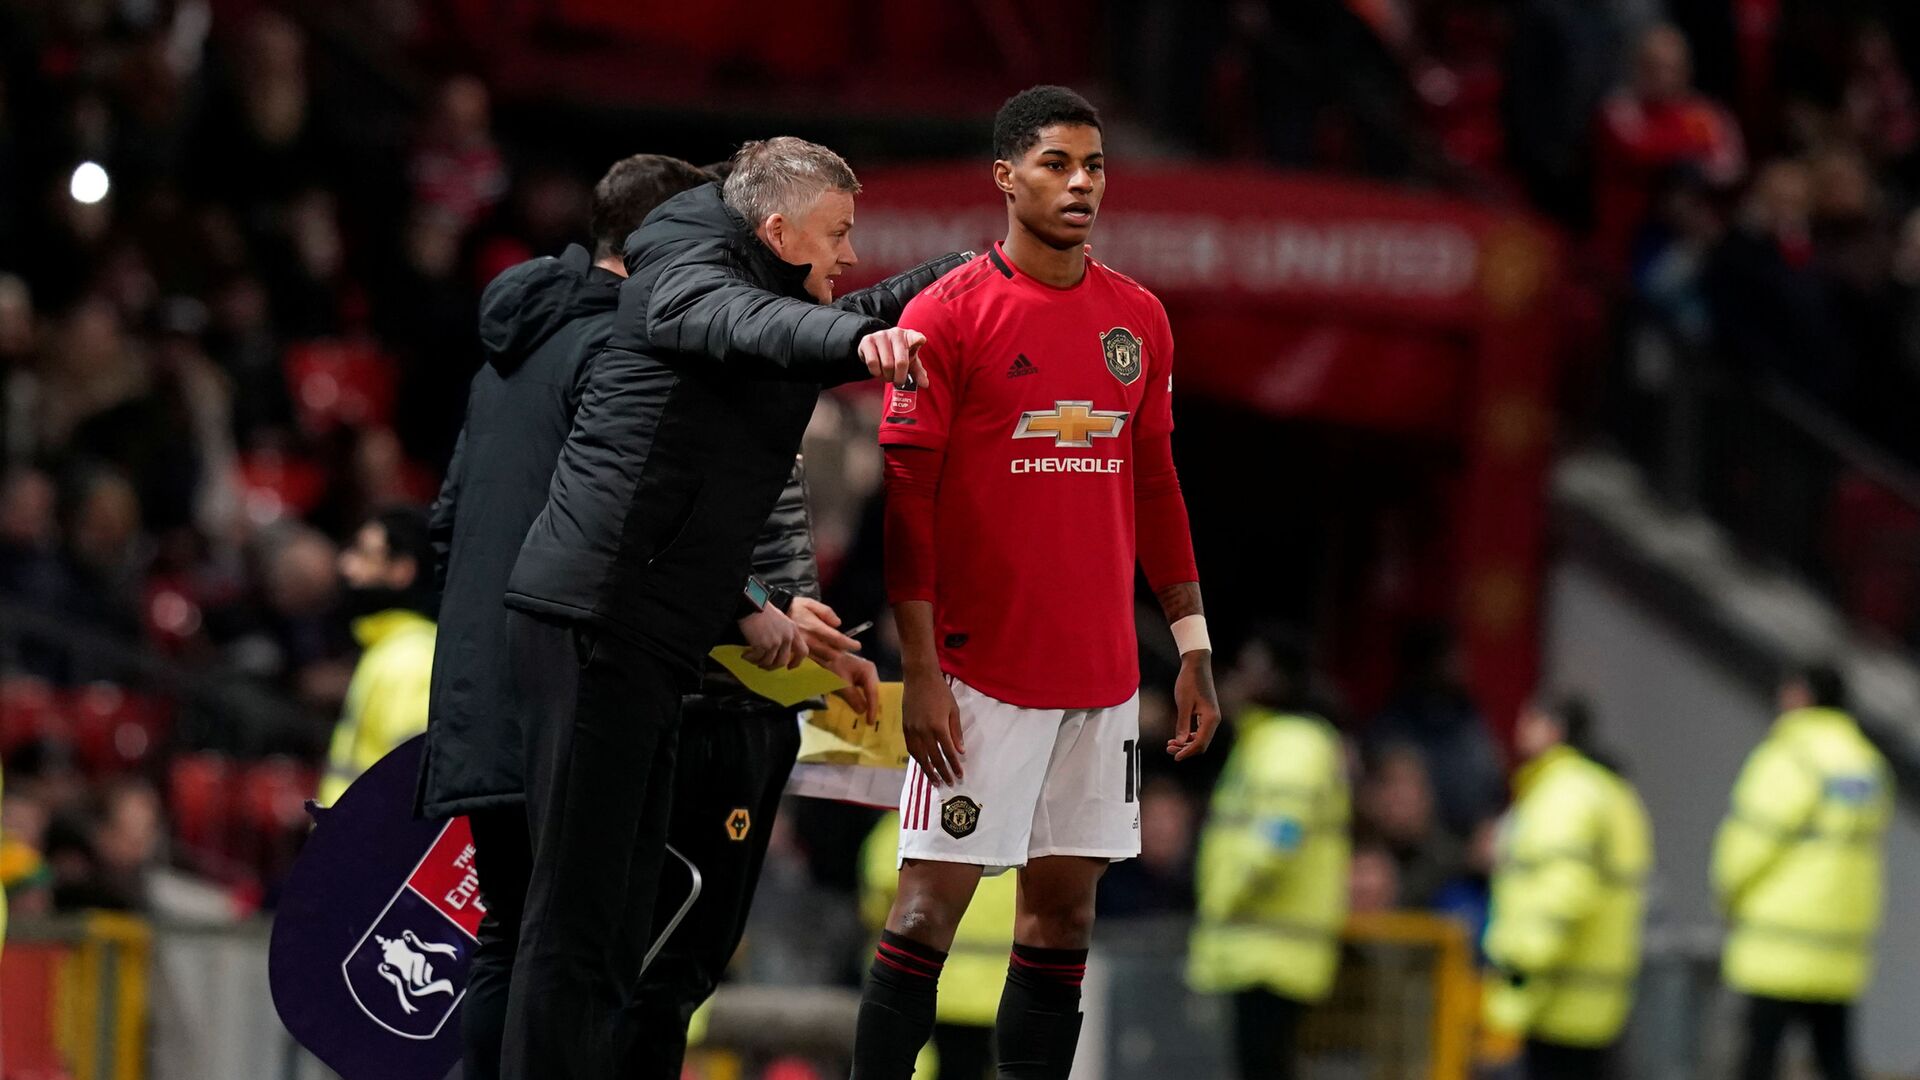 Soccer Football - FA Cup Third Round Replay - Manchester United v Wolverhampton Wanderers - Old Trafford, Manchester, Britain - January 15, 2020   Manchester United manager Ole Gunnar Solskjaer talks to Marcus Rashford as he prepares to come on  - اسپوتنیک افغانستان  , 1920, 19.03.2021